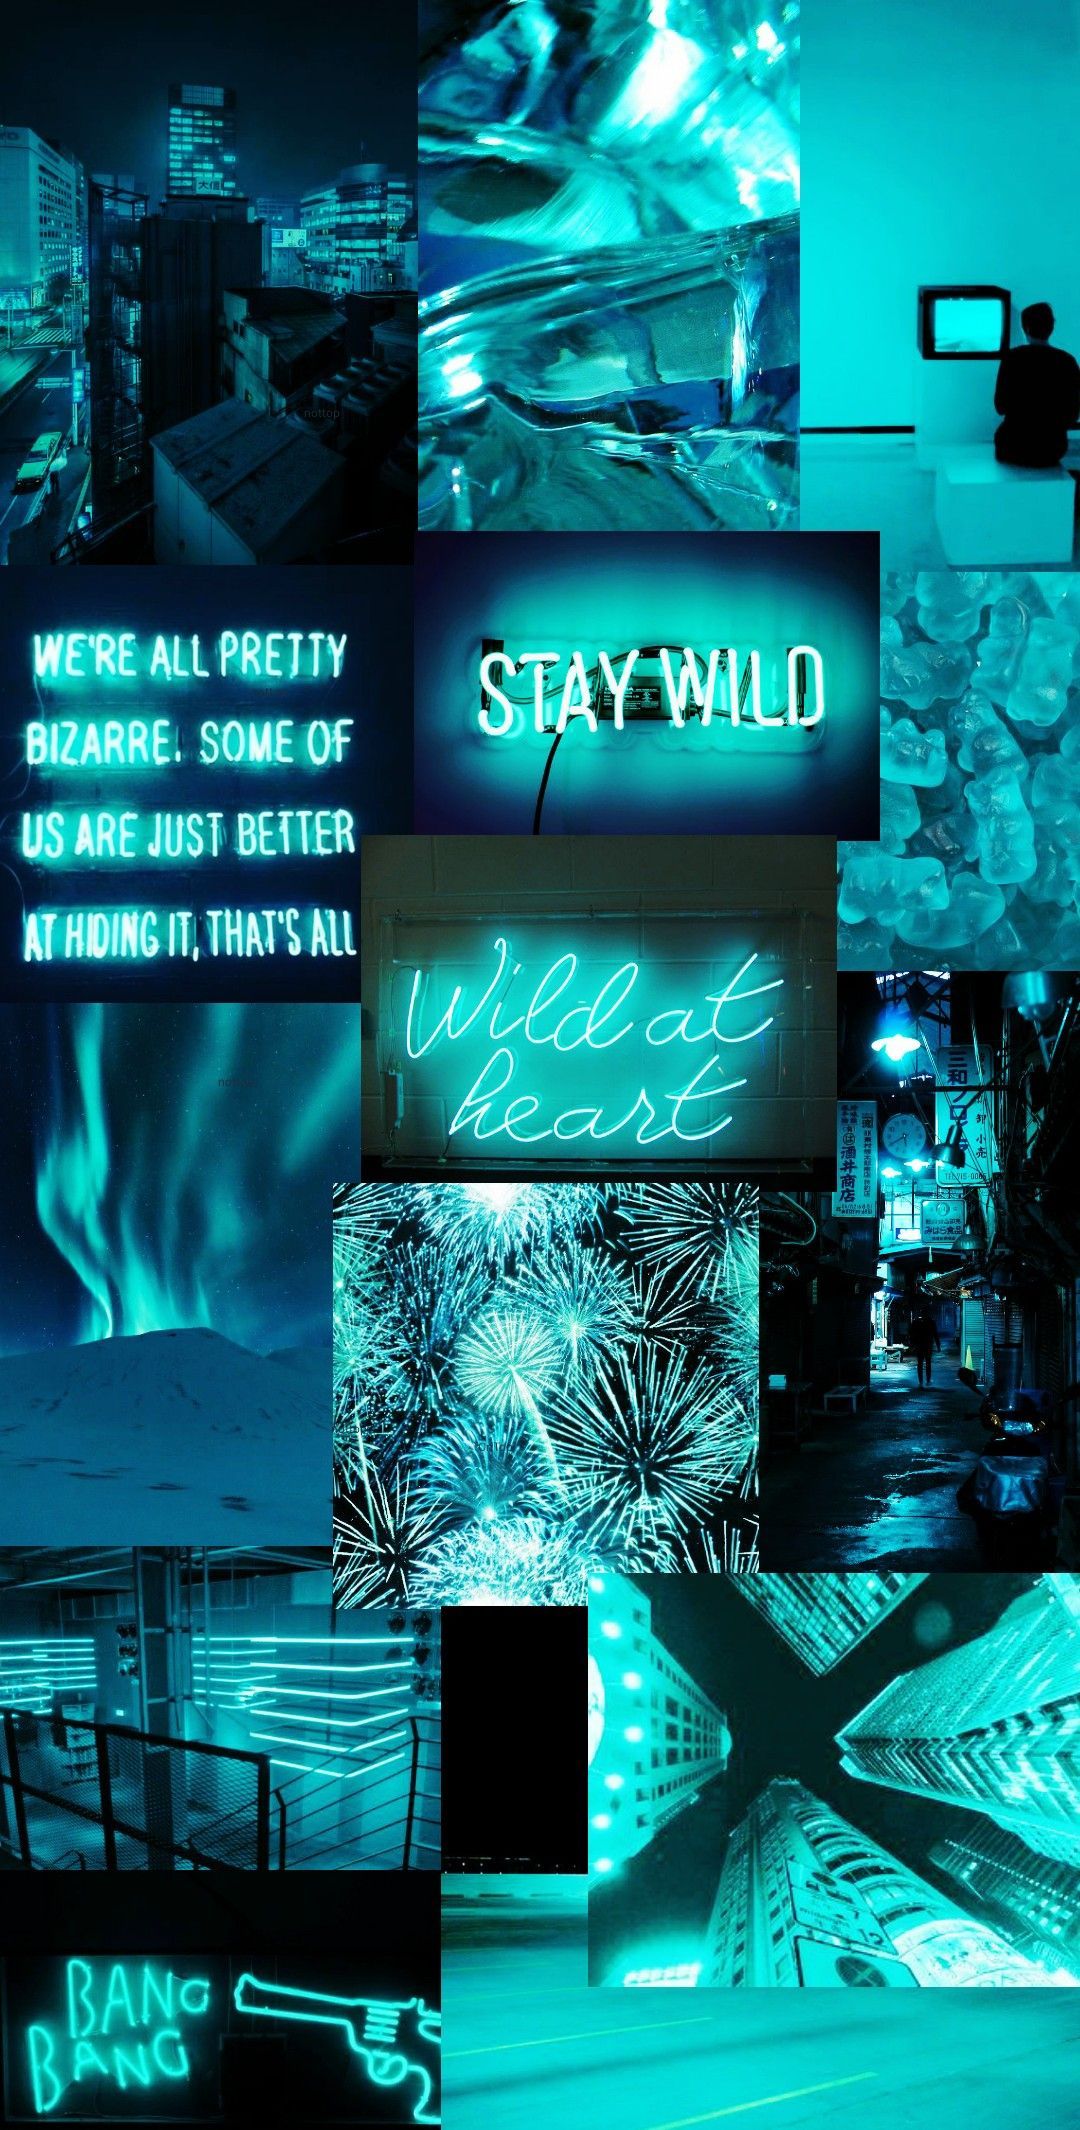 A collage of images with blue and green light - Neon blue